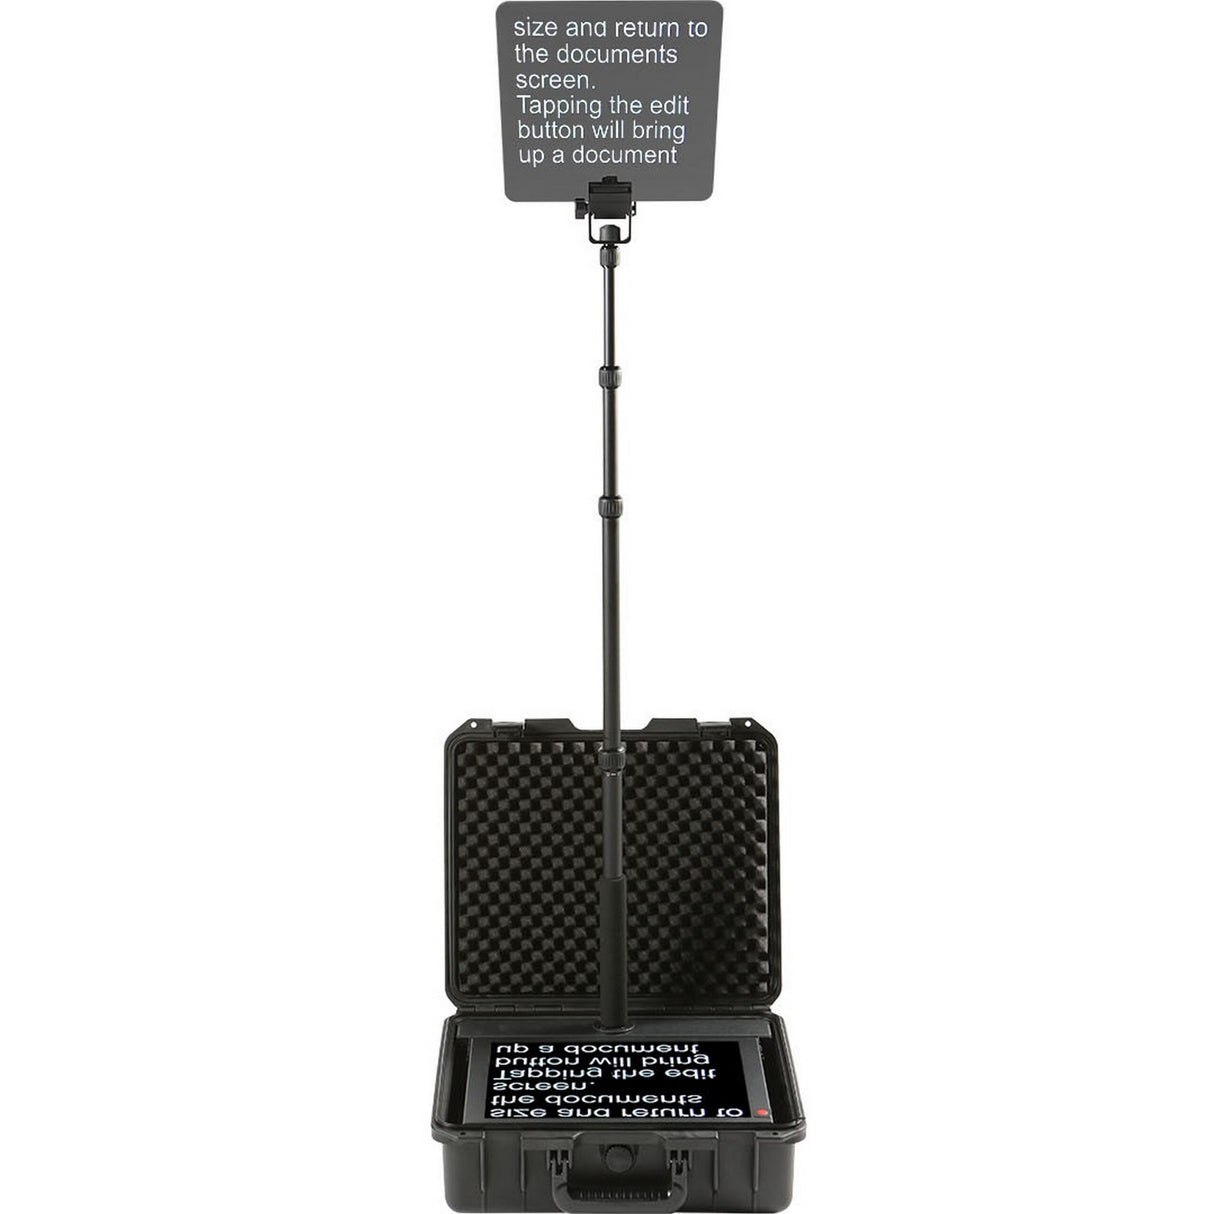 Datavideo TP-800 Conference Teleprompter with Tablet